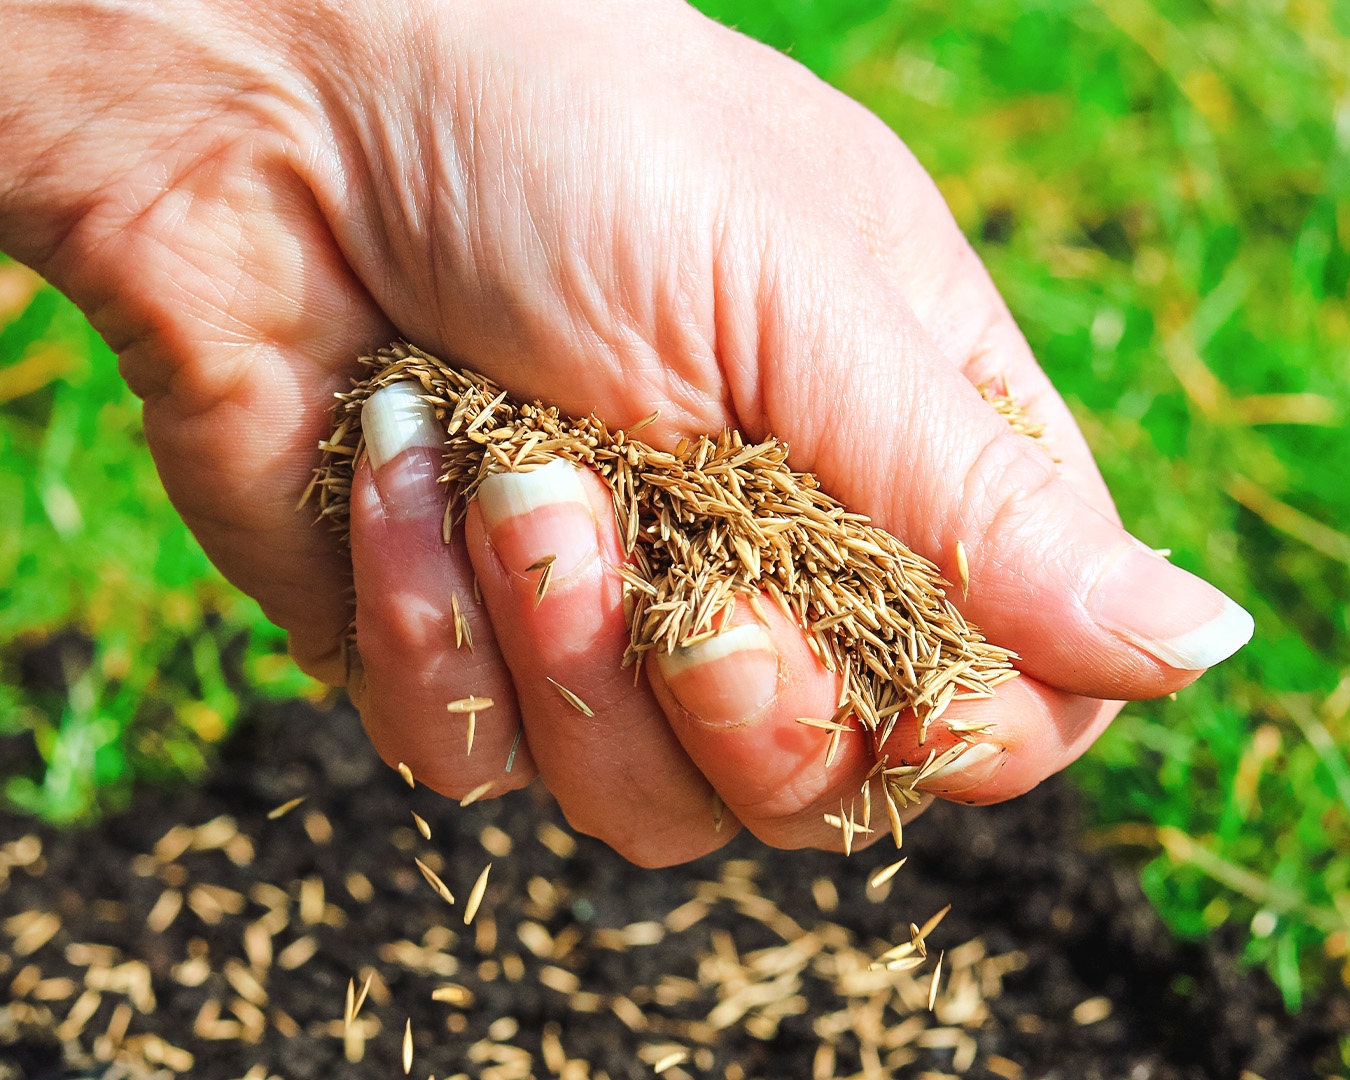 Planting grass seed image